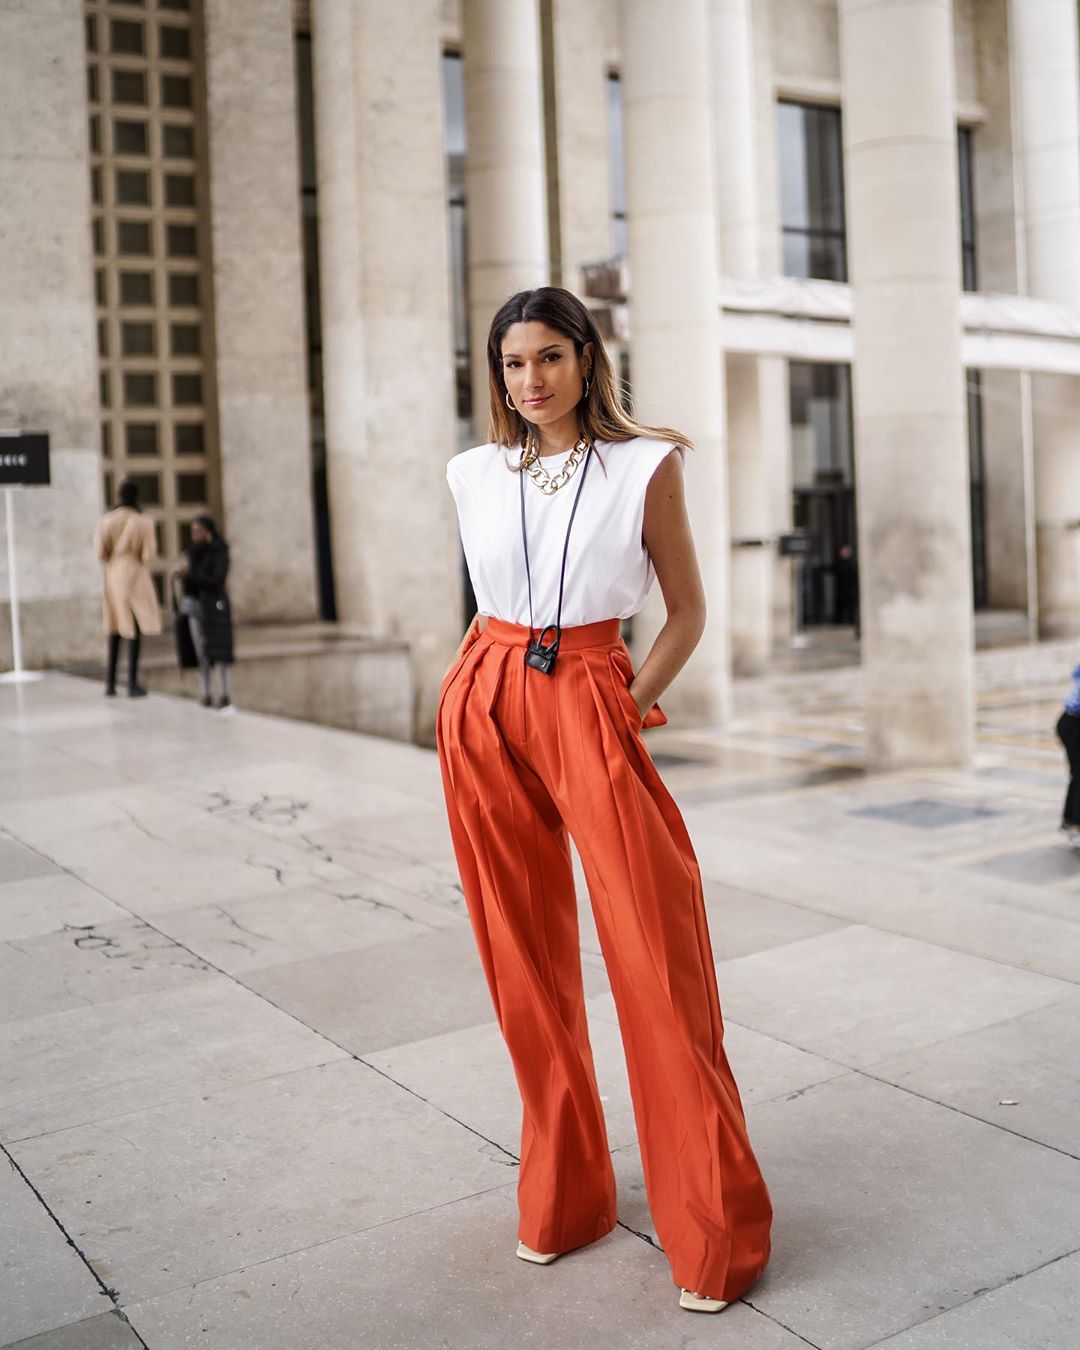 This French Girl’s Look Makes Us Want Colorful Trousers For Summer